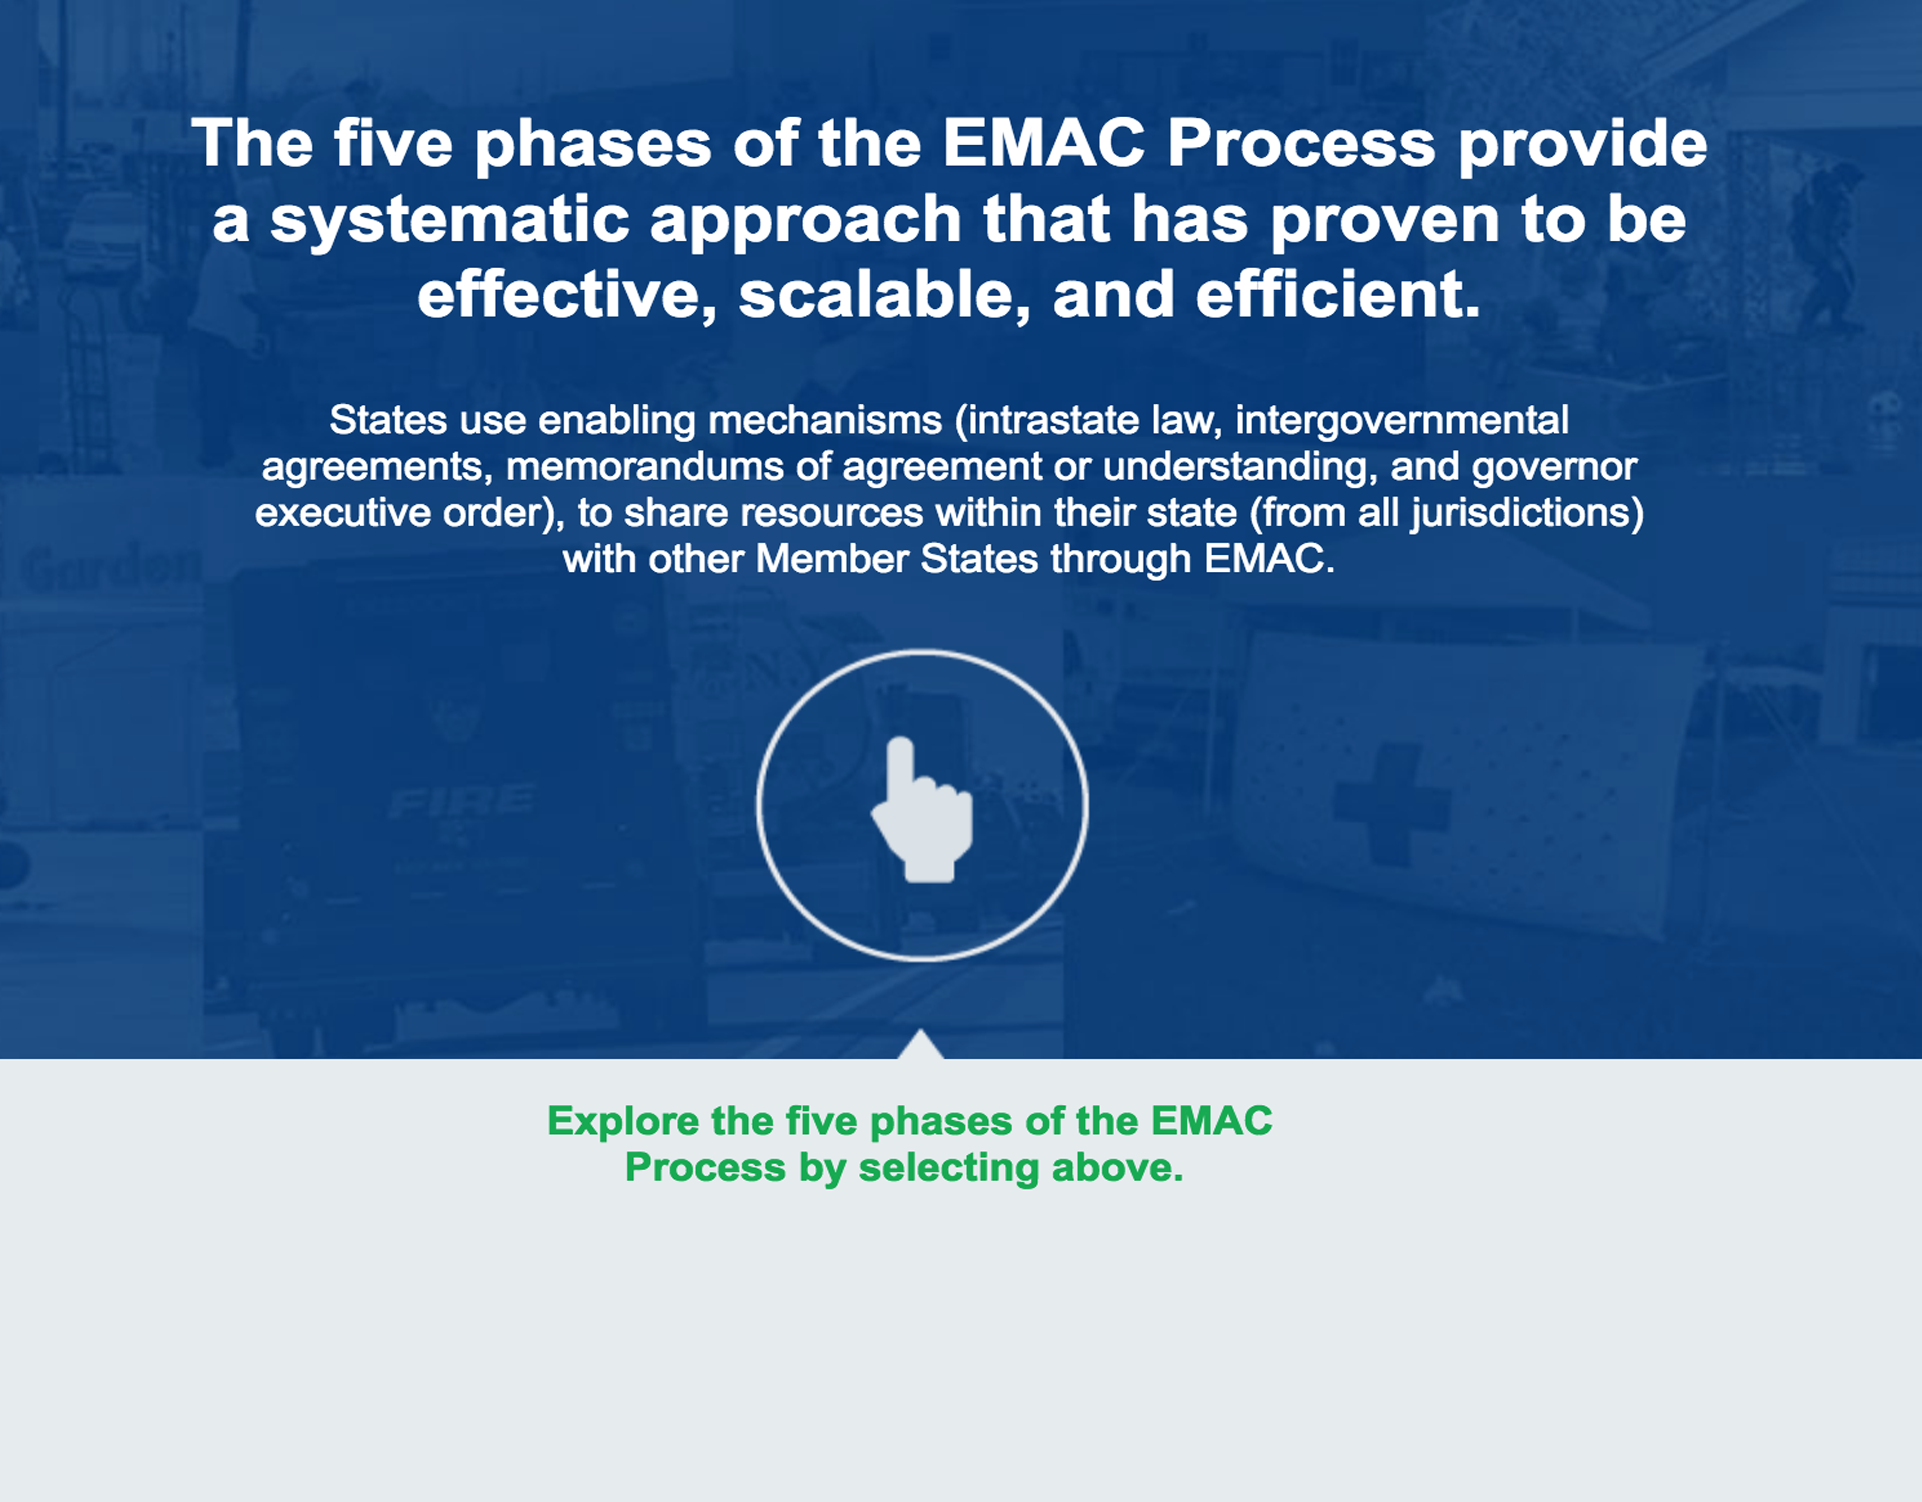 The EMAC Process